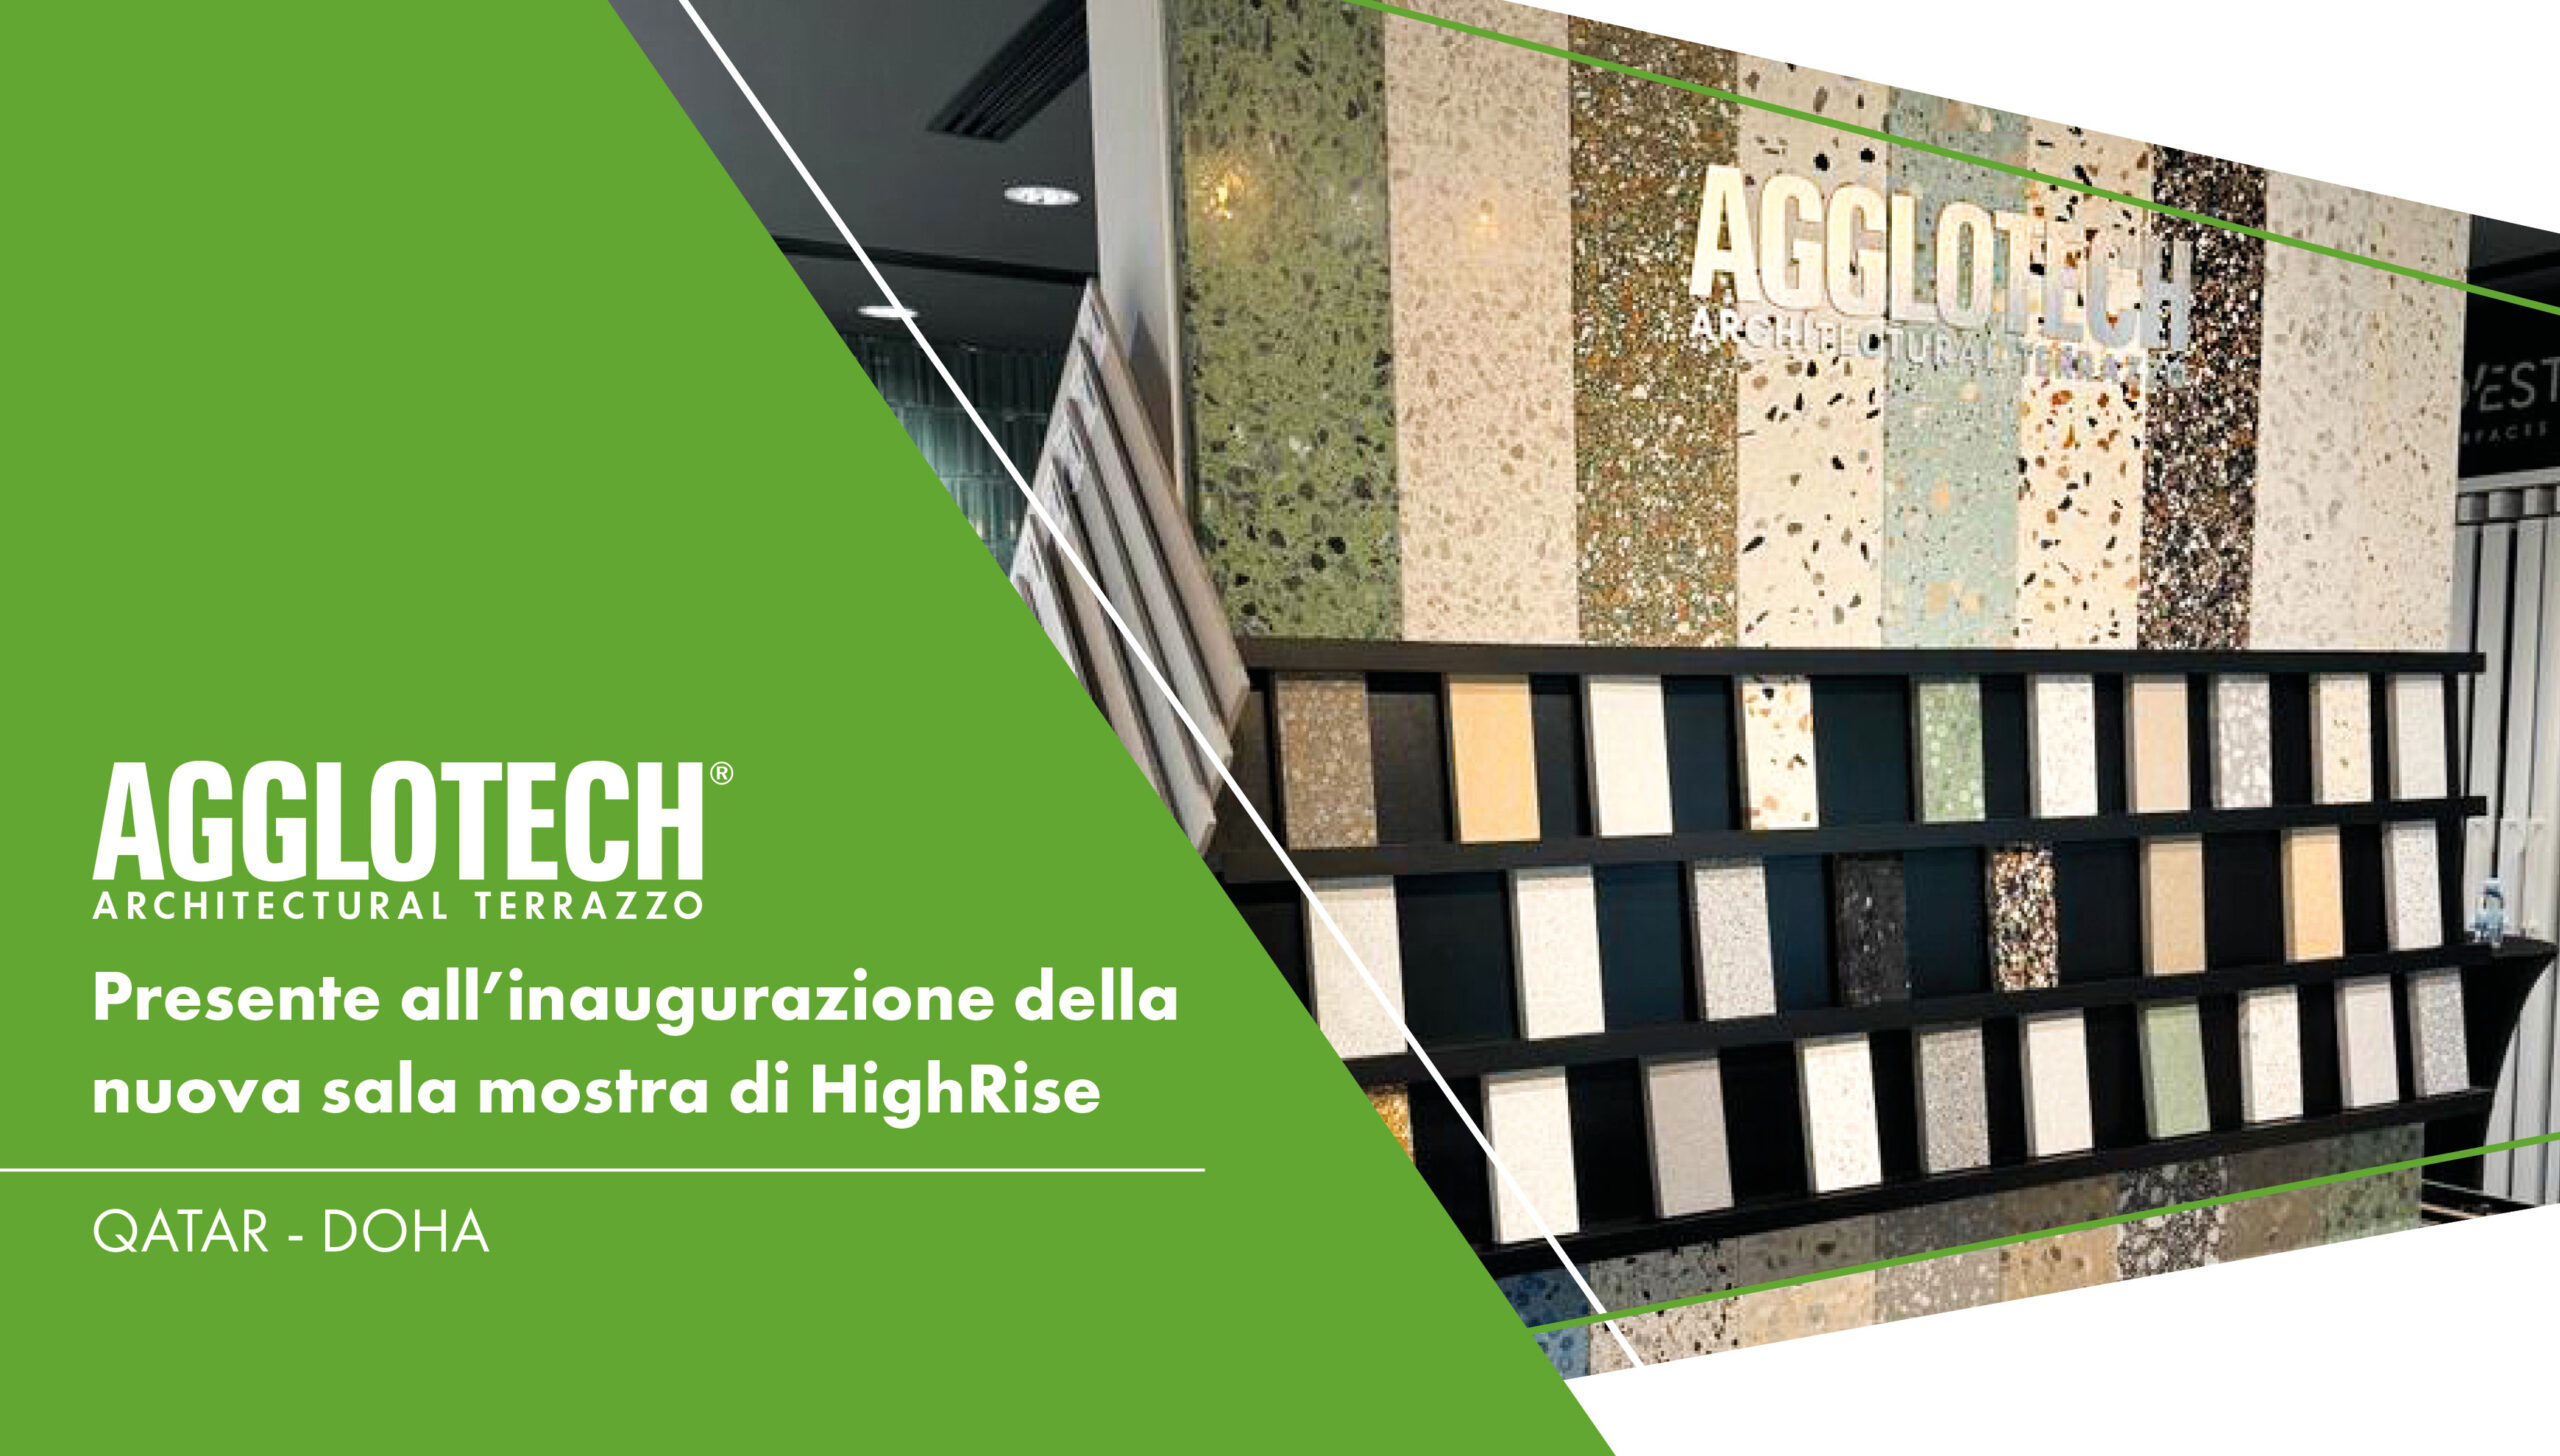 Agglotech invited to the inauguration of the new Highrise showroom in Qatar